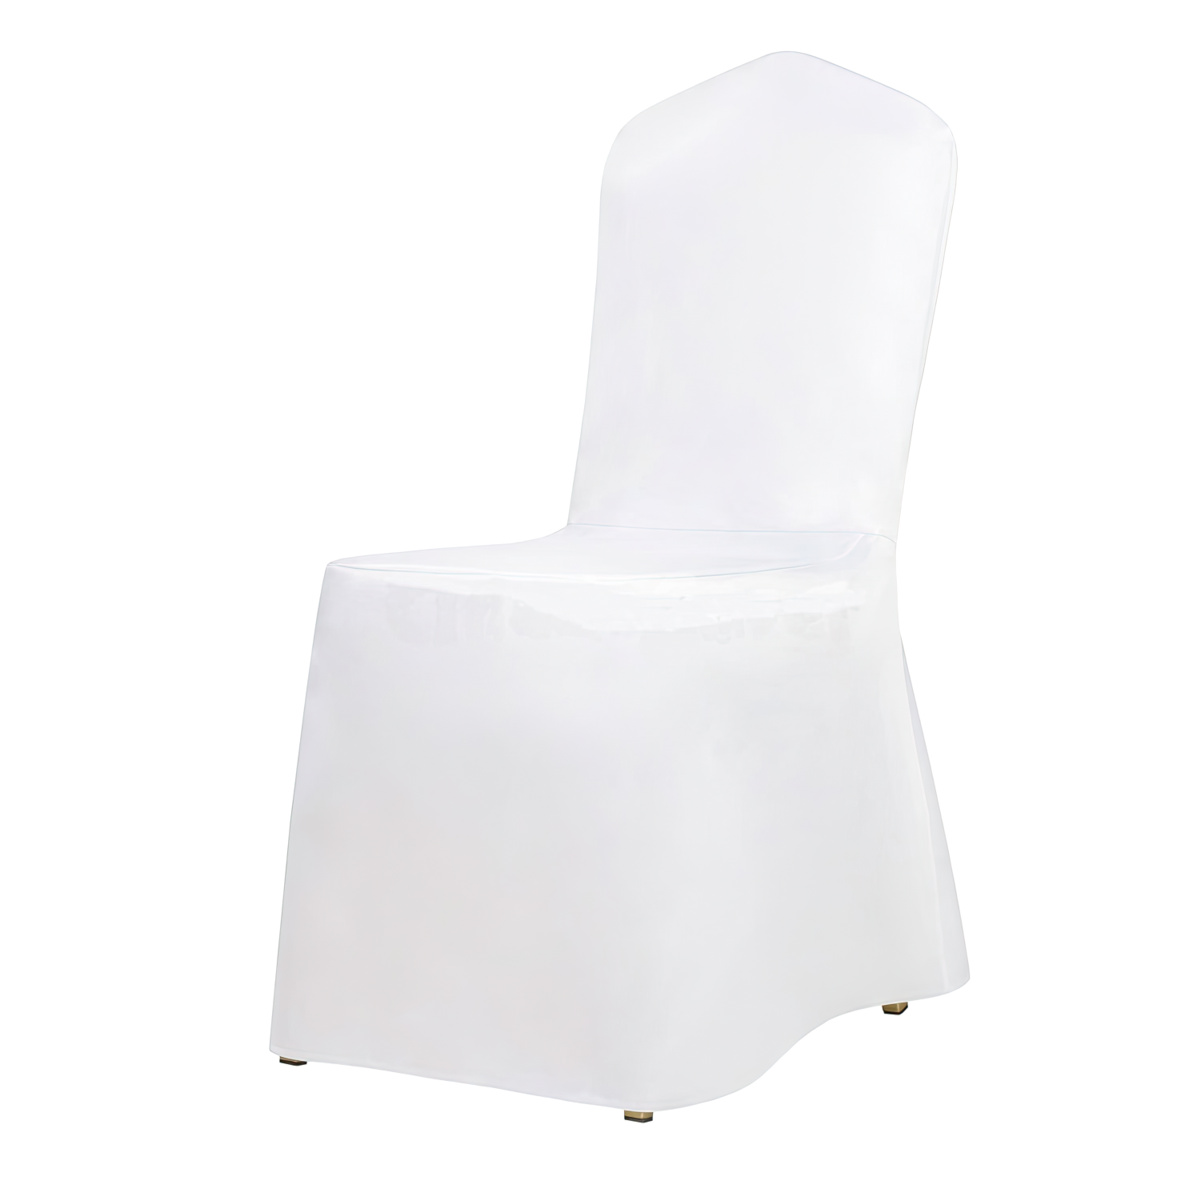 Banquet cover on the chair. Rent Banquet chair covers